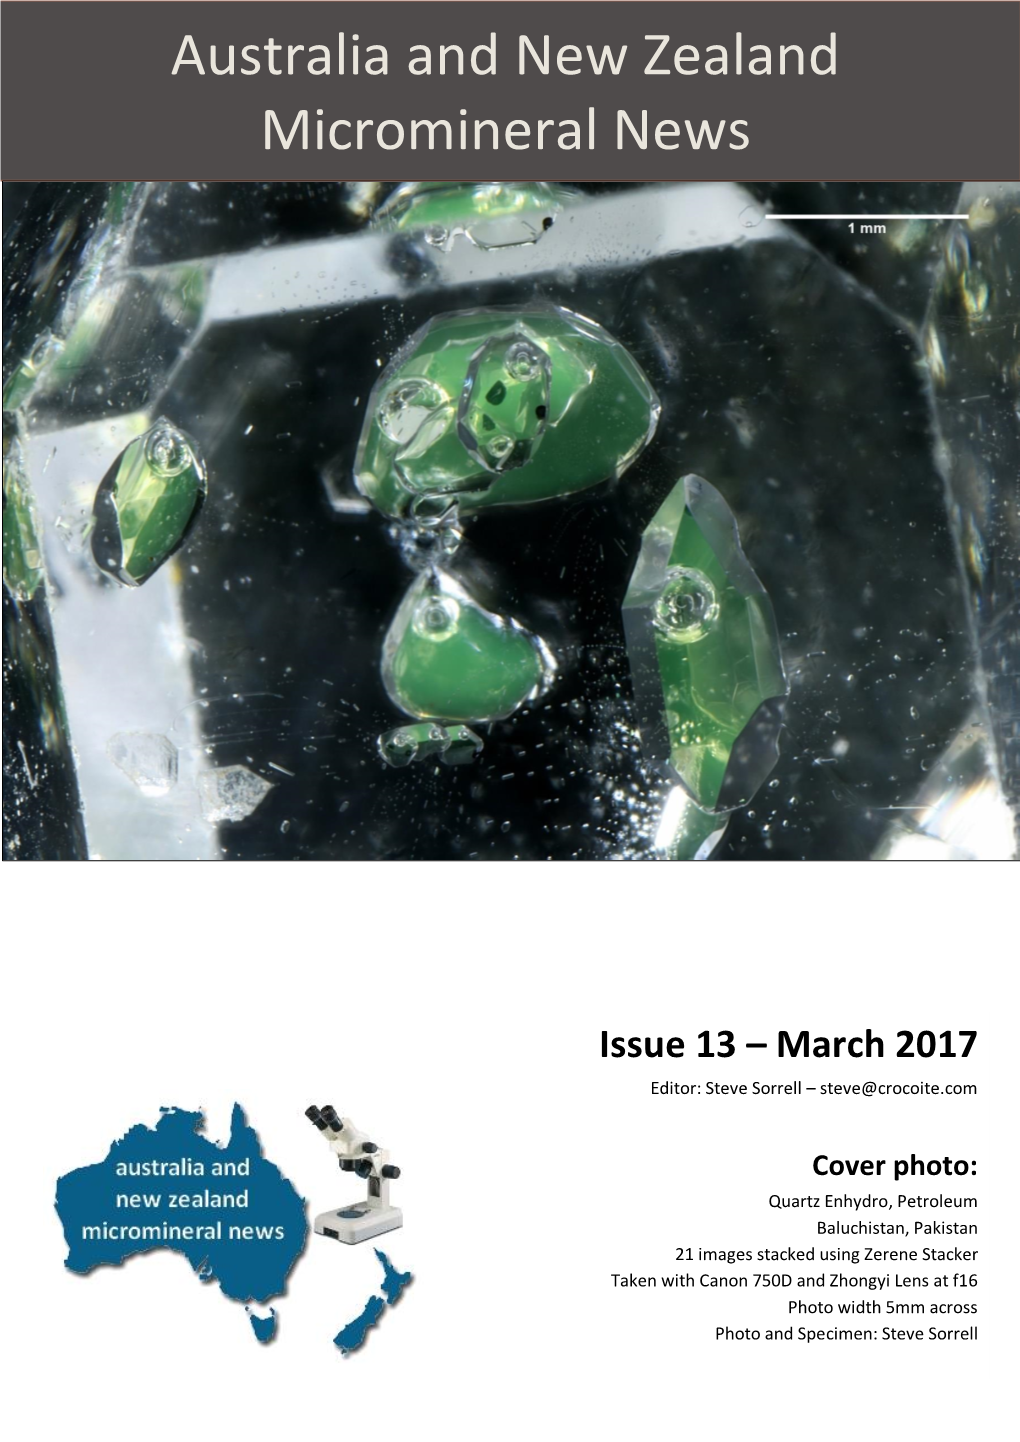 Australia and New Zealand Micromineral News